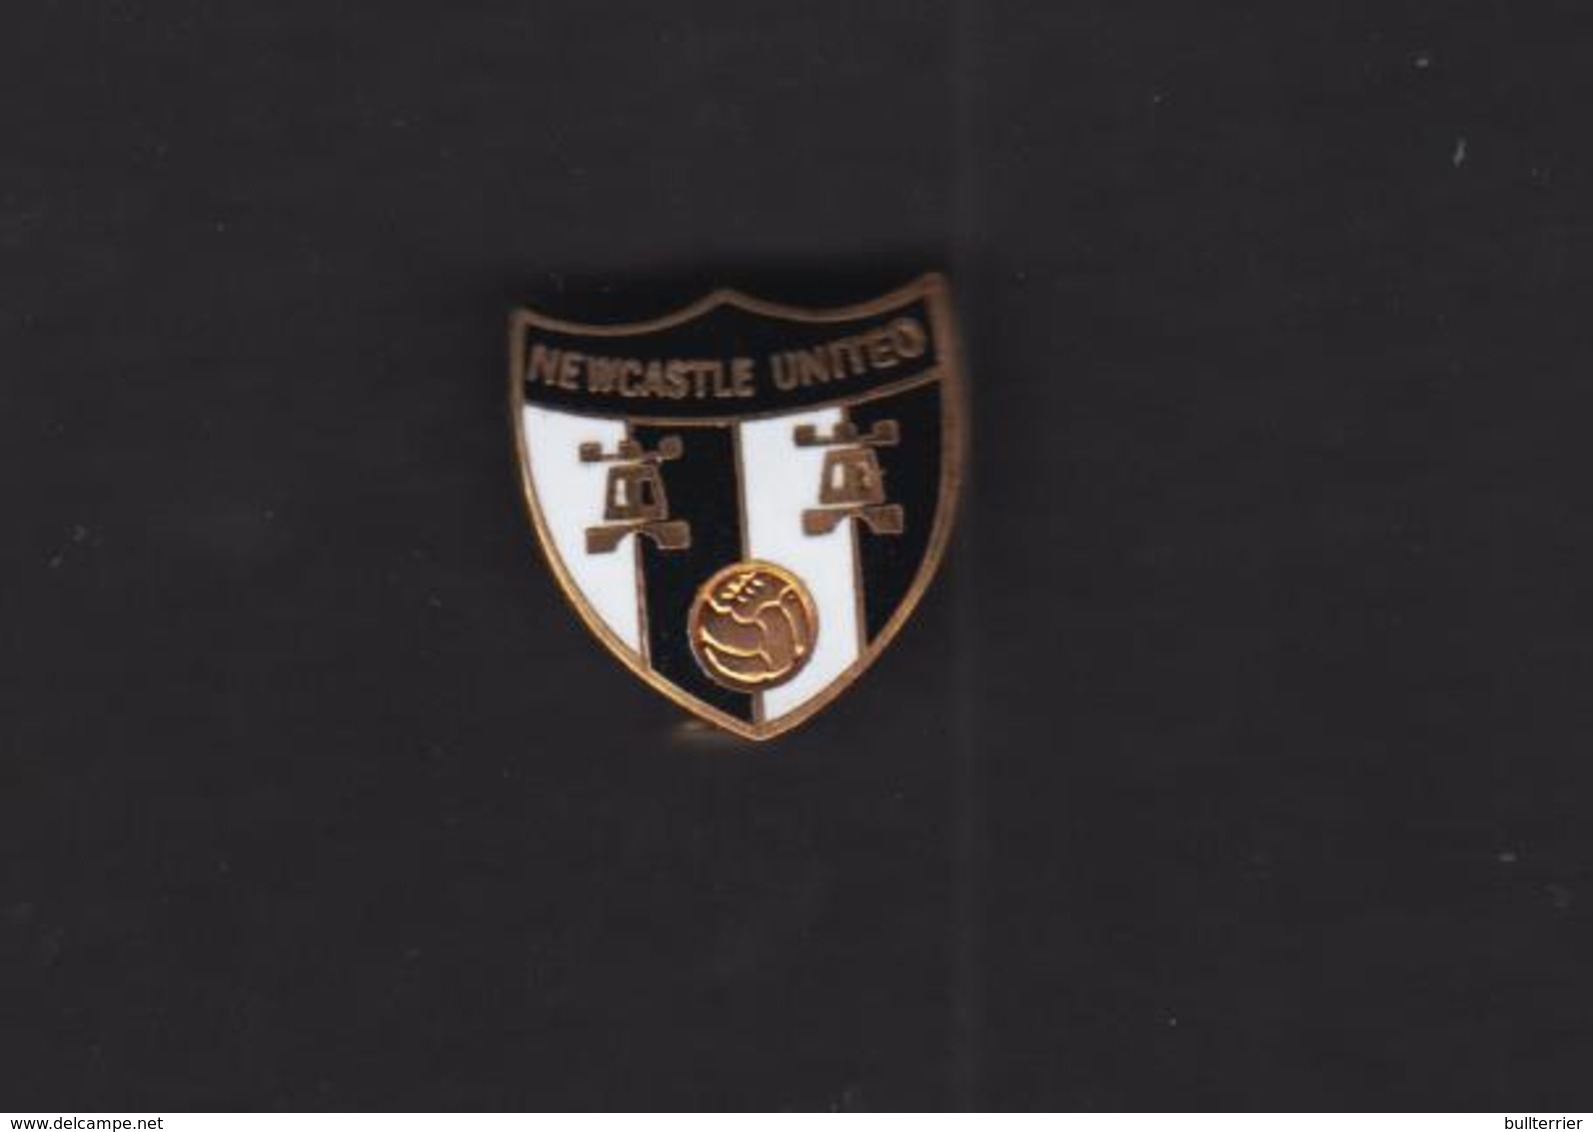 NEWCASTLE UNITED -  OLD  BLACK AND WHITE CASTLES & FOOTBALL BADGE  -,  FINE CONDITION - Football